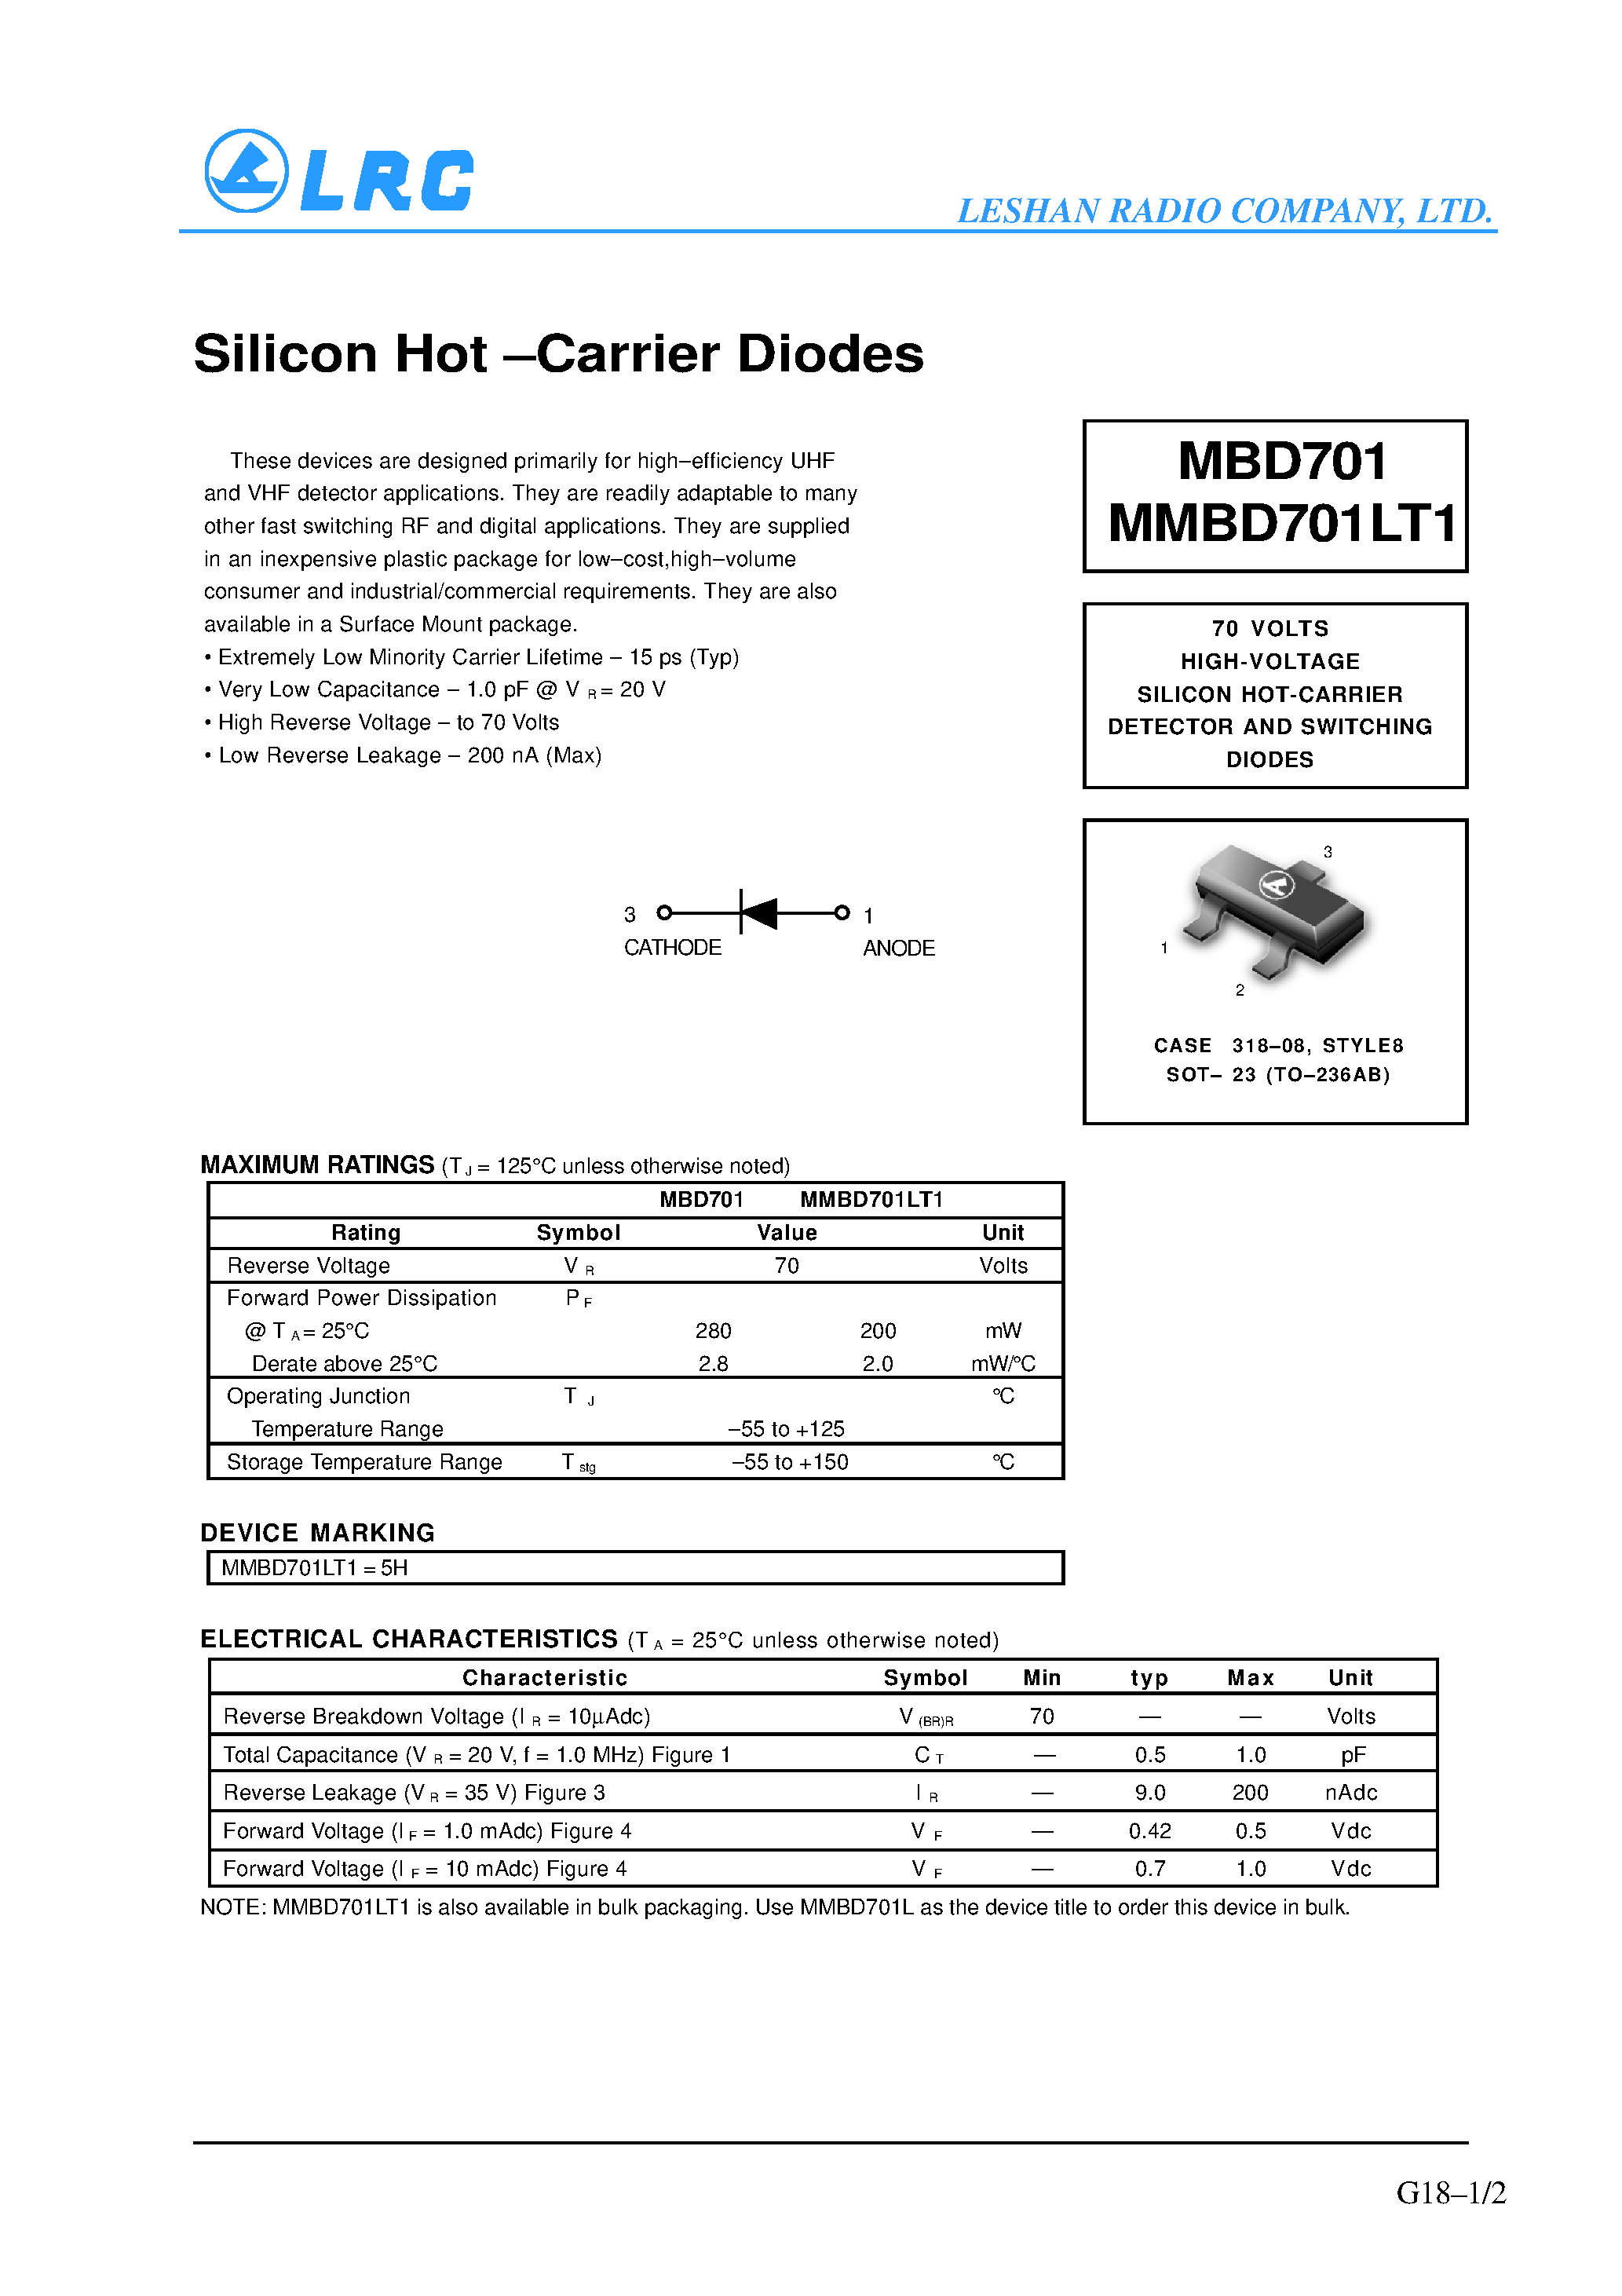 Даташит MMBD701LT1 - Silicon Hot-Carrier Diodes страница 1